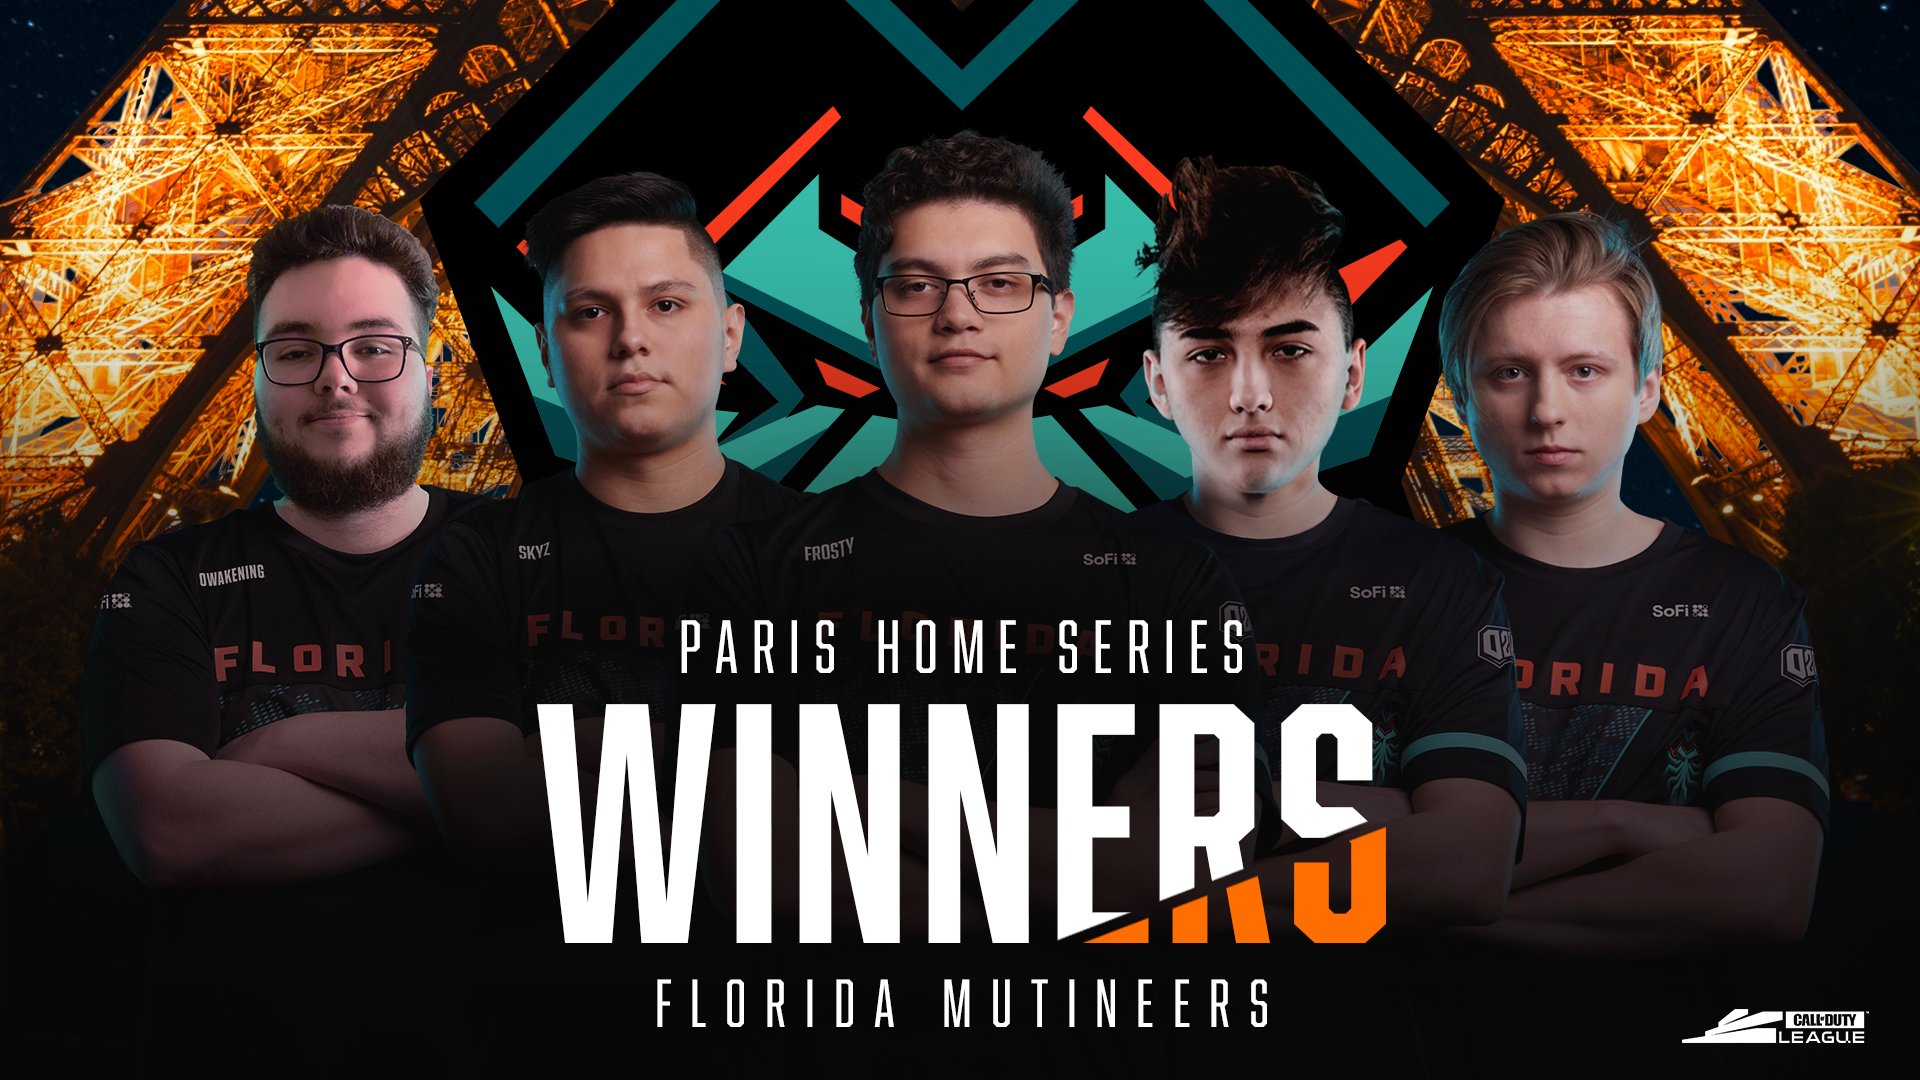 Florida Mutineers win CDL Paris: How they became back to back champs